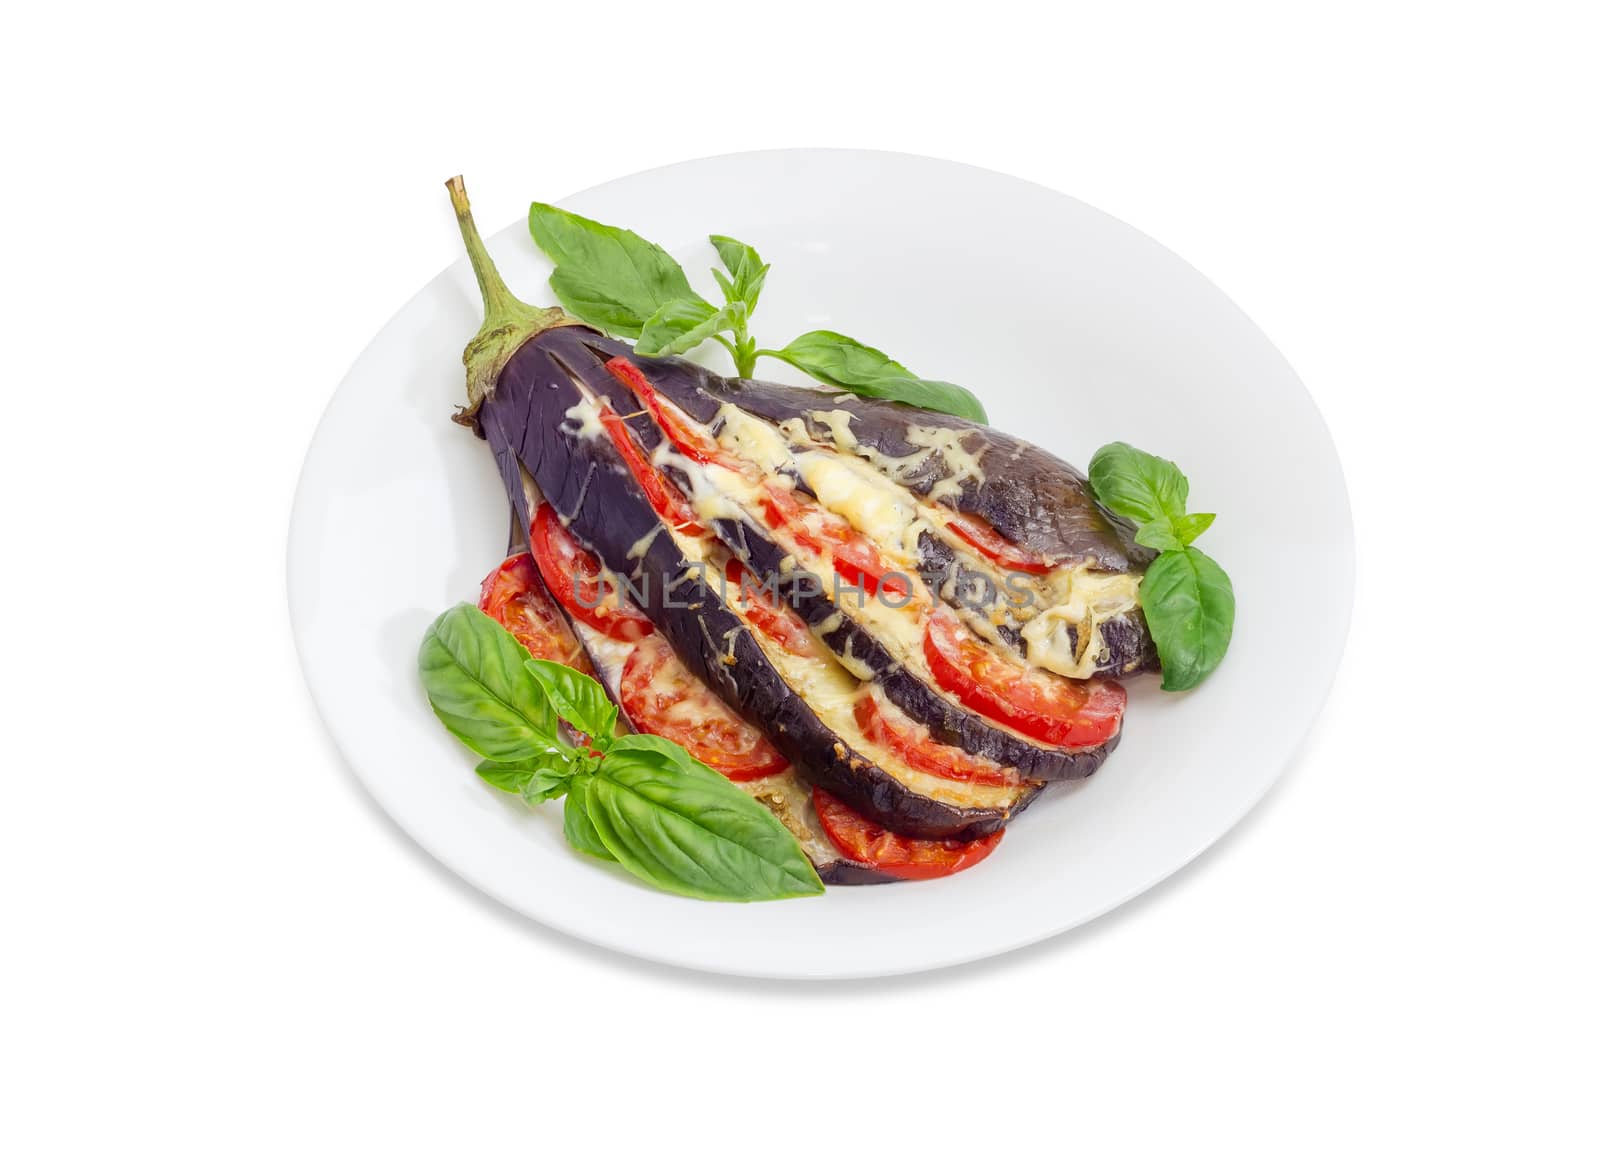 Baked eggplant stuffed with vegetables and cheese decorated with basil leaves on white dish on a white background
